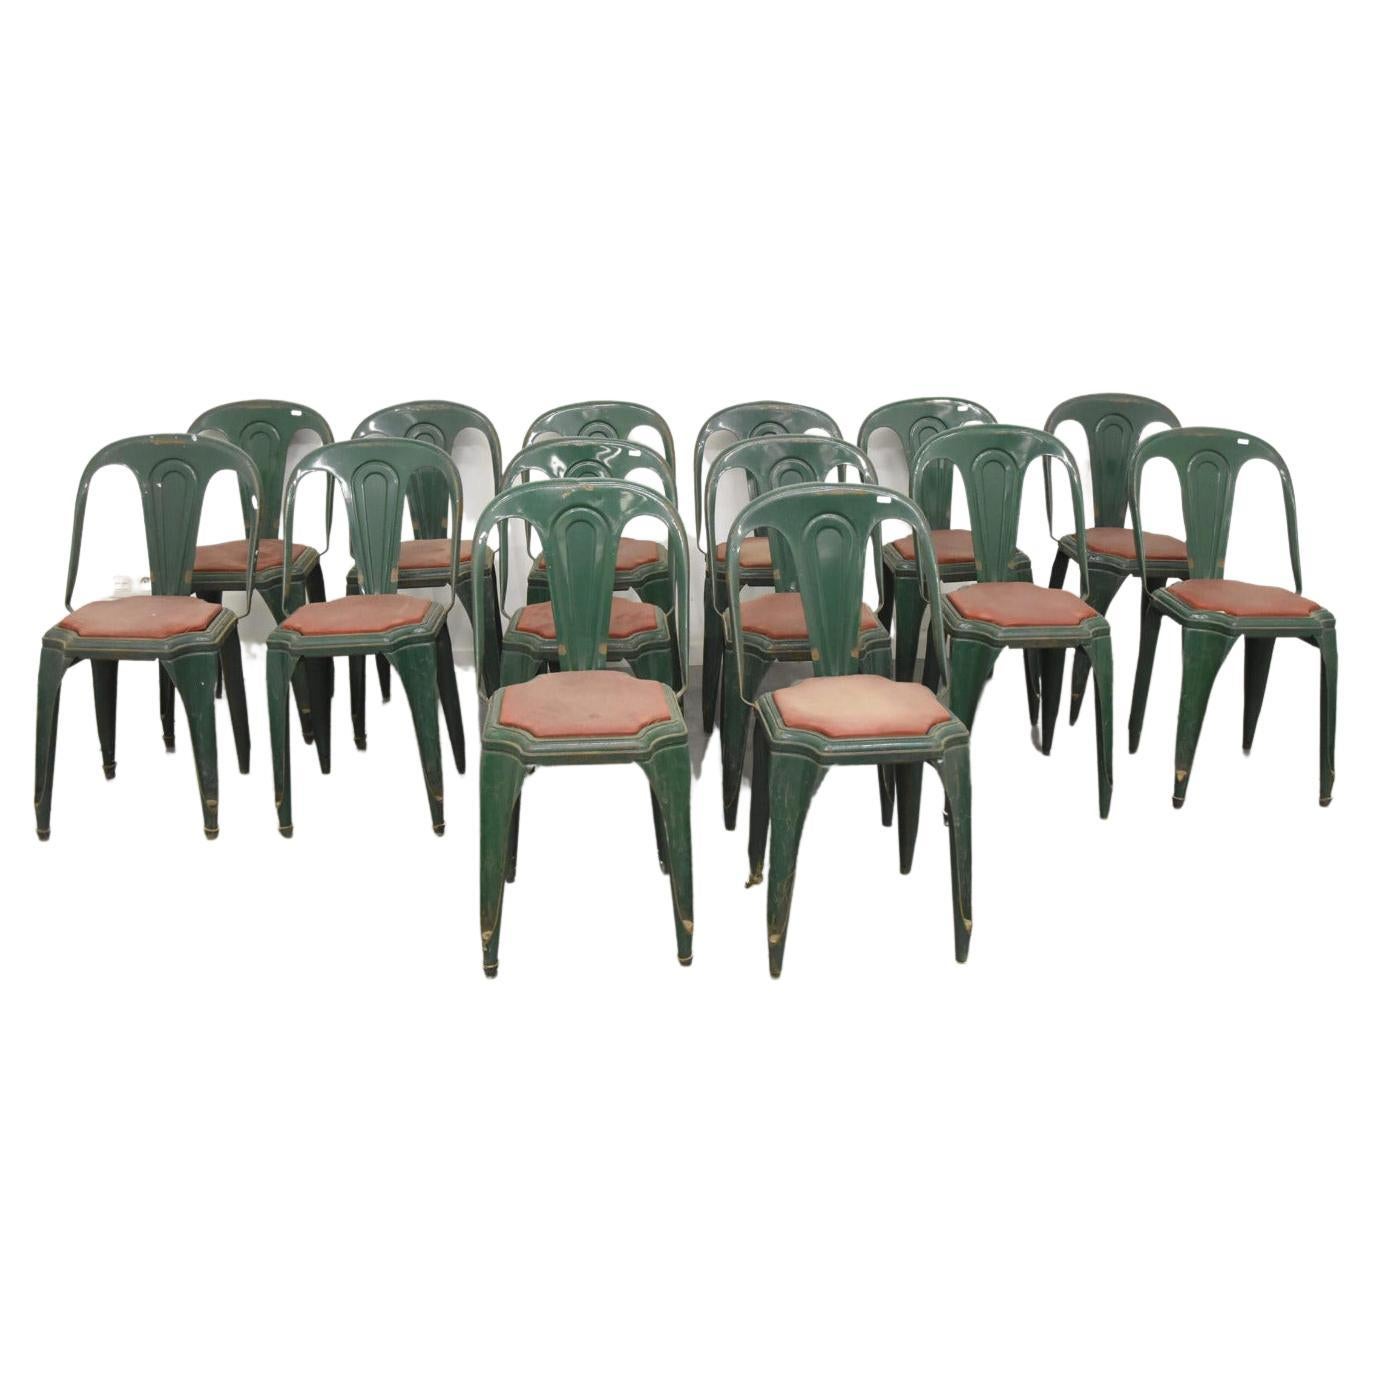 Suite of 14 Industrial Chairs of the Fibrocit Brand, circa 1950 For Sale